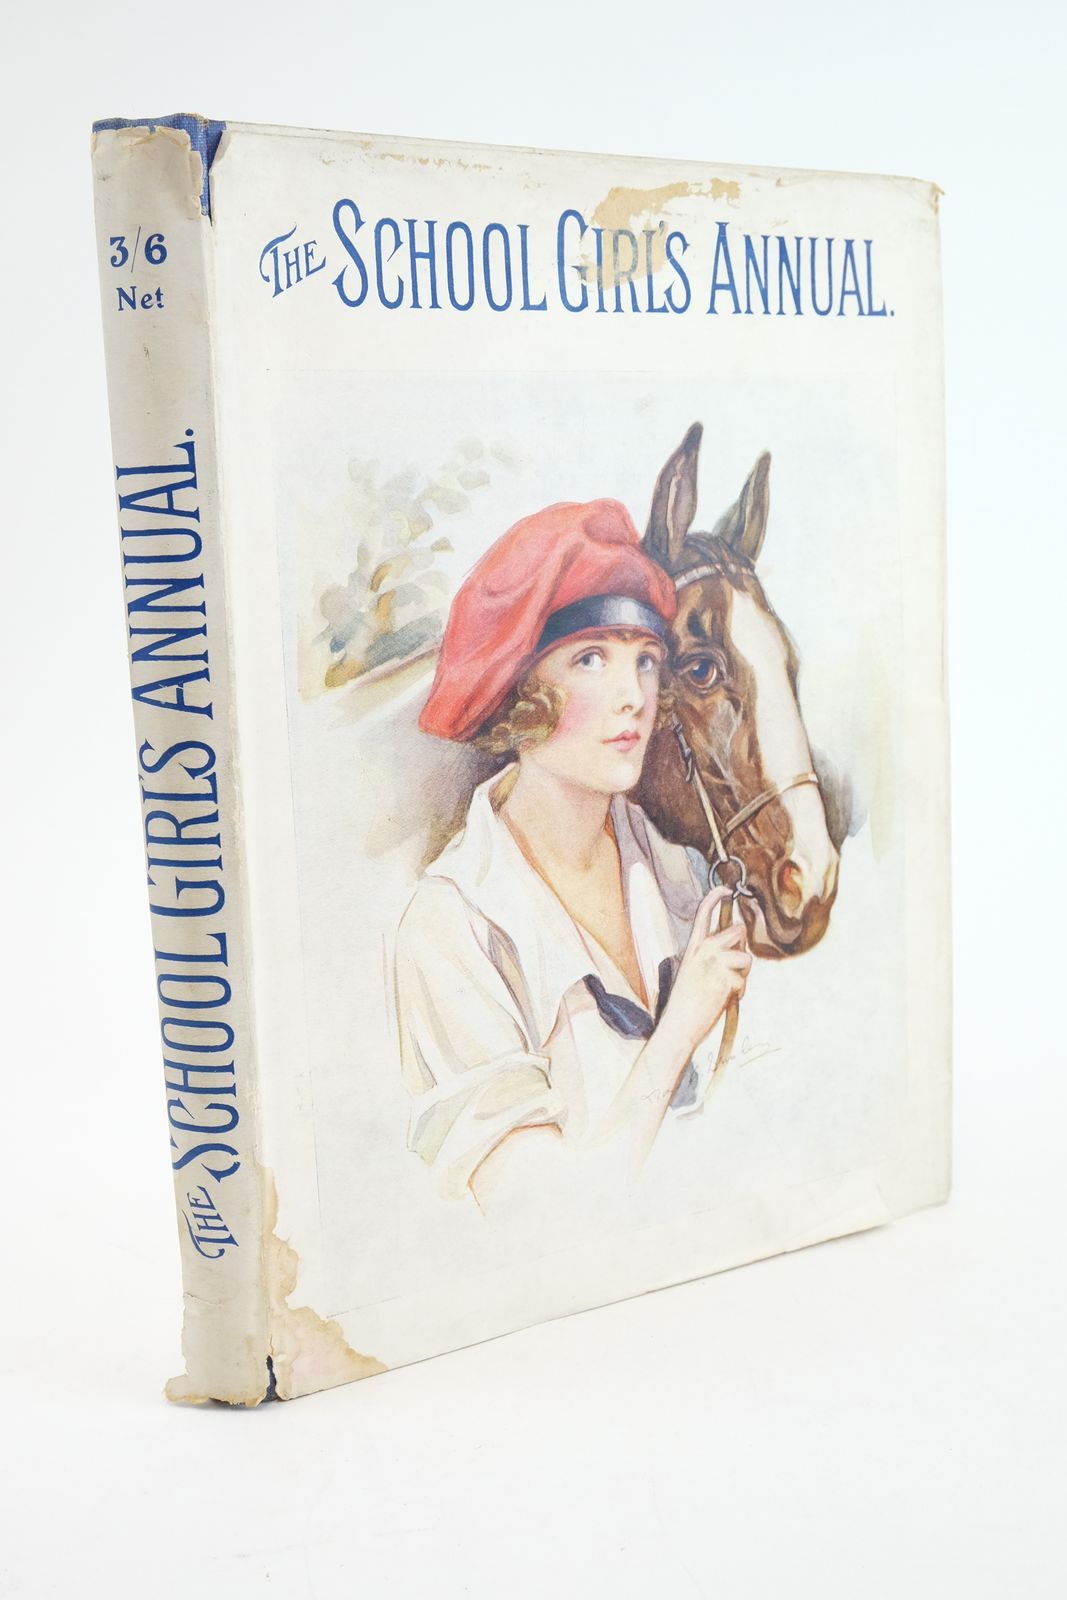 Photo of THE SCHOOL GIRL'S ANNUAL written by Klickmann, Flora illustrated by Angell, Maude Wain, Louis Kirmse, Persis Stampa, G.L. Browne, Gordon et al.,  (STOCK CODE: 1323930)  for sale by Stella & Rose's Books